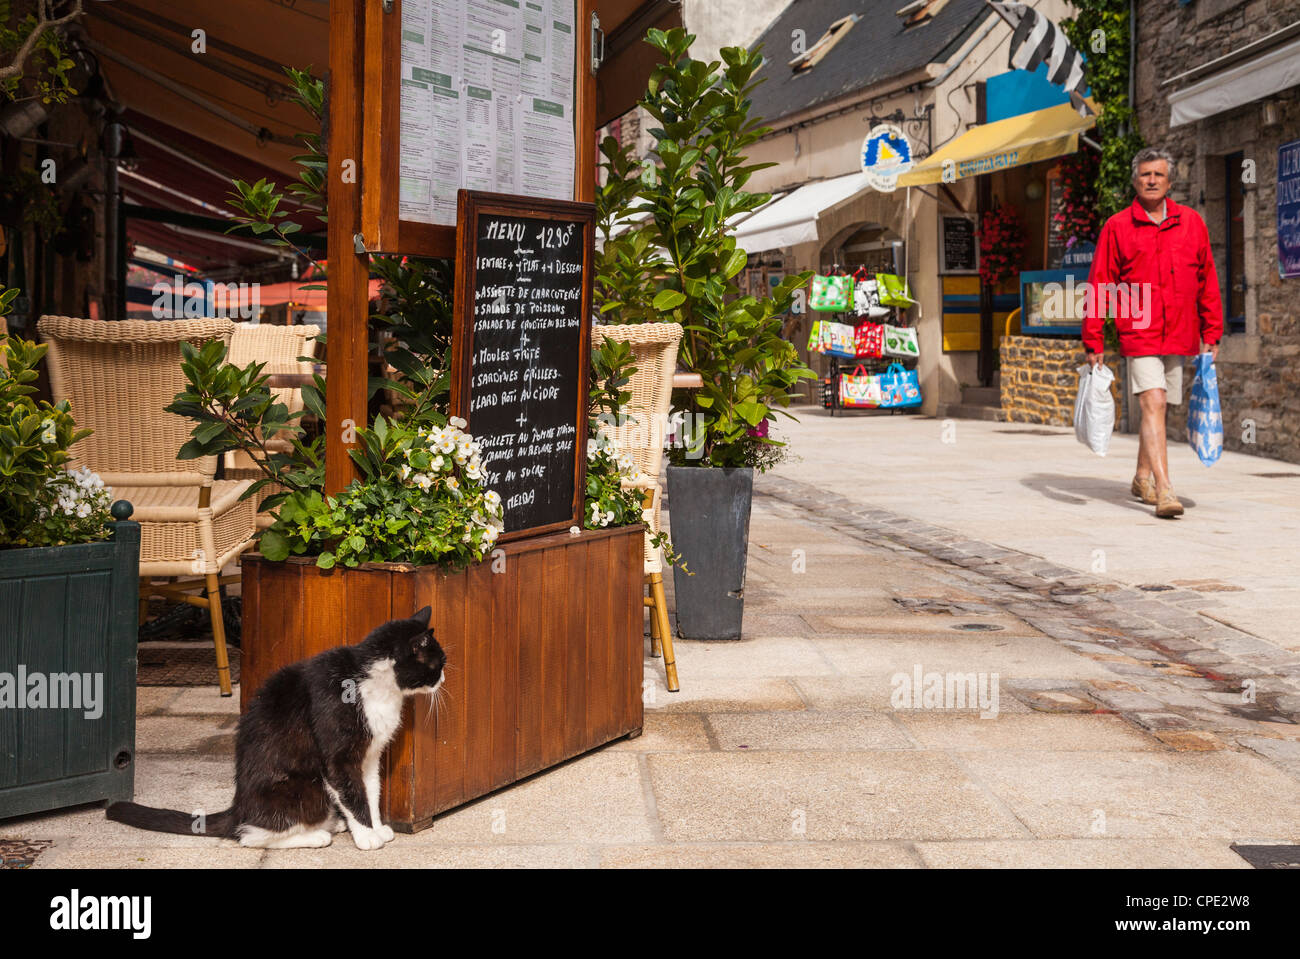 A cat sits on the pavement outside a restaurant in the old city of Concarneau, Brittany, France. Stock Photo